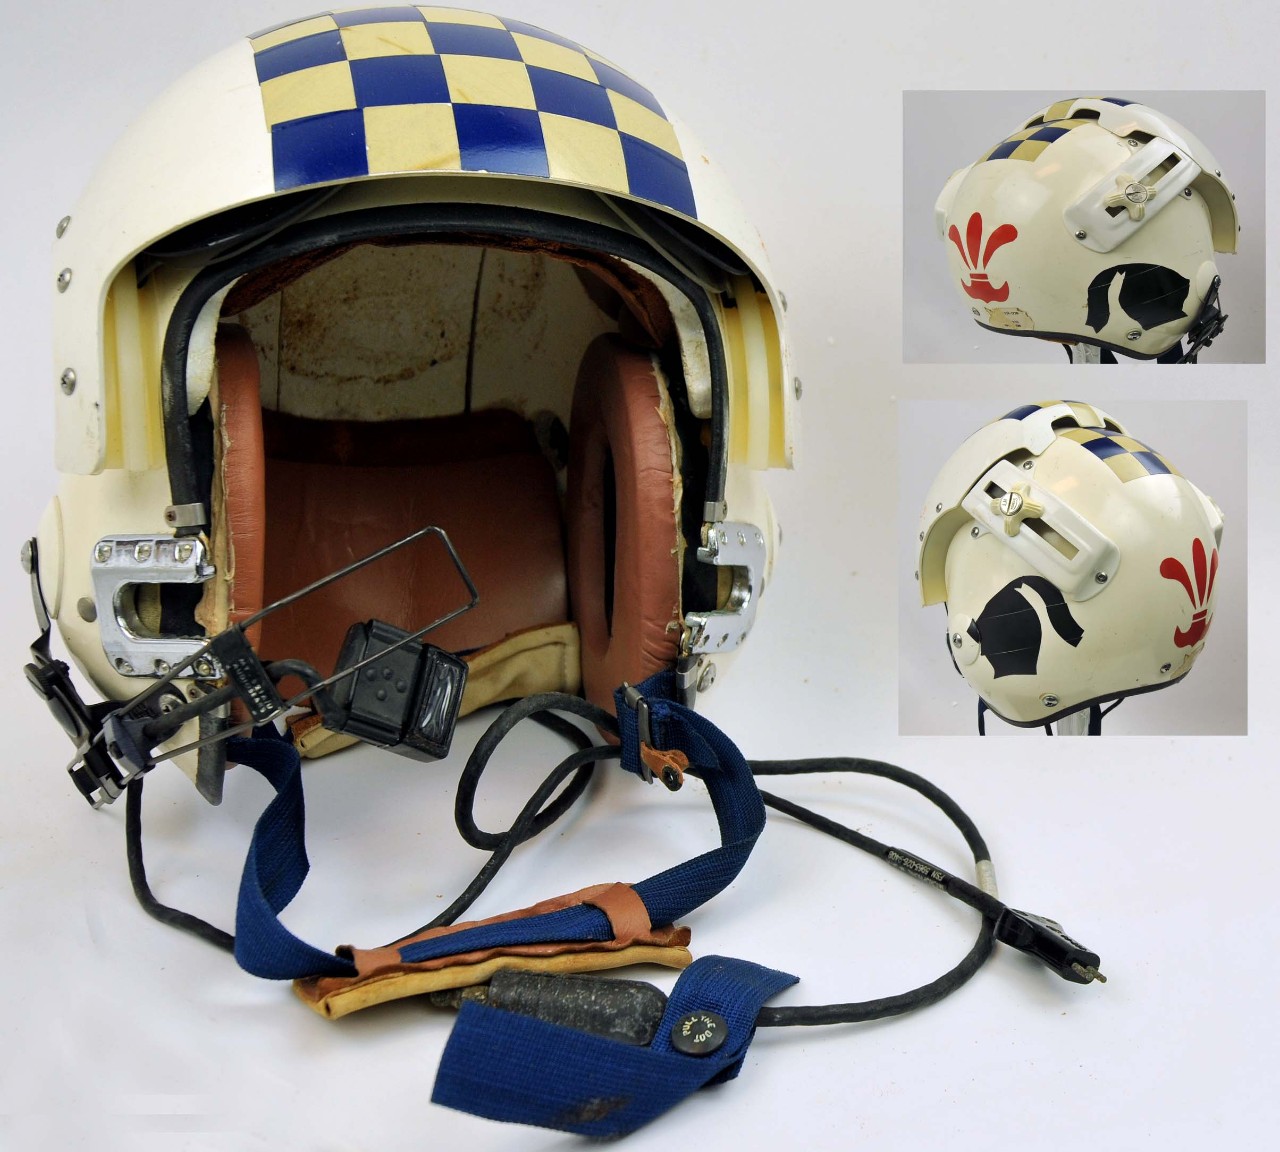 One white flight helmet. The top and visor of the helmet have a square patch of blue and yellow squares in a checkboard pattern. The visor is adjustable along a track with two adjustment hand wheels on either side of the helmet. The part of the h...